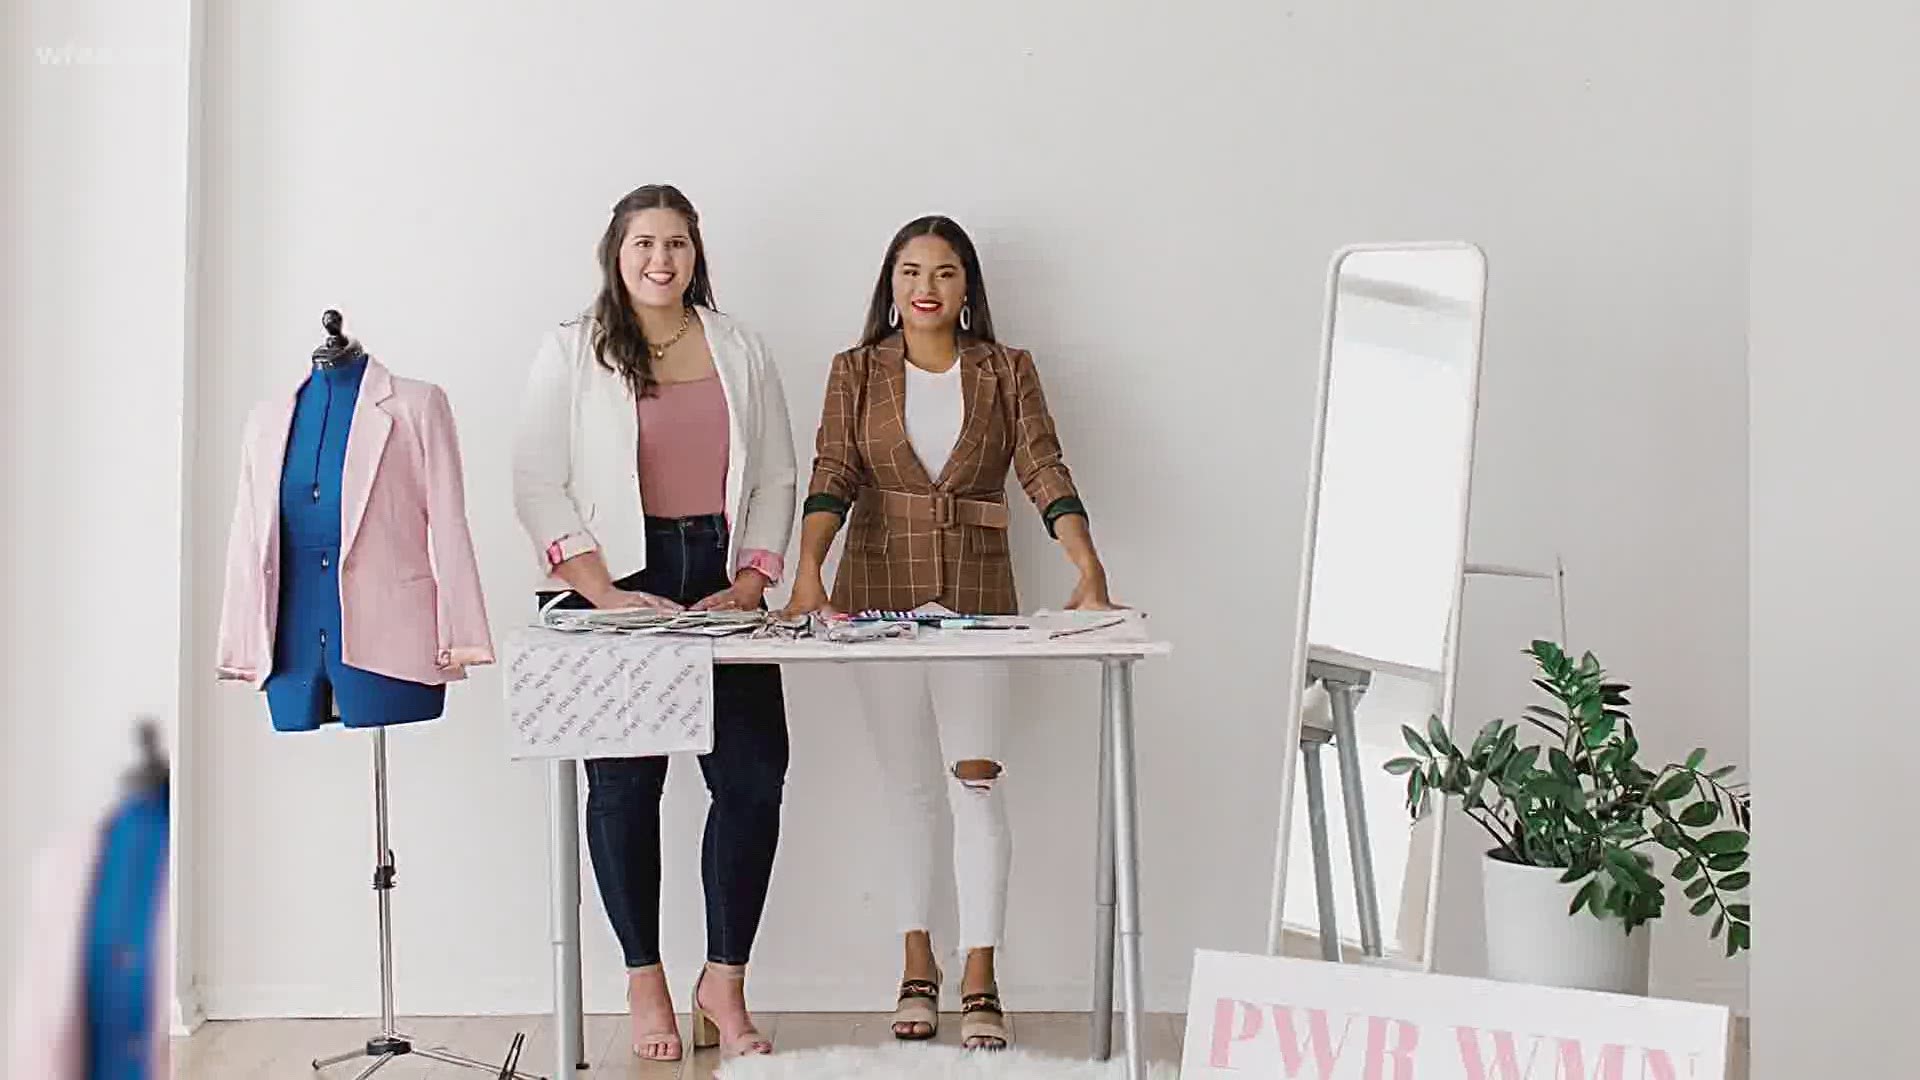 Sensibility and strength guided two Dallas entrepreneurs to design a blazer meant to make all women feel like PWR WMN in this #UpWithHer.